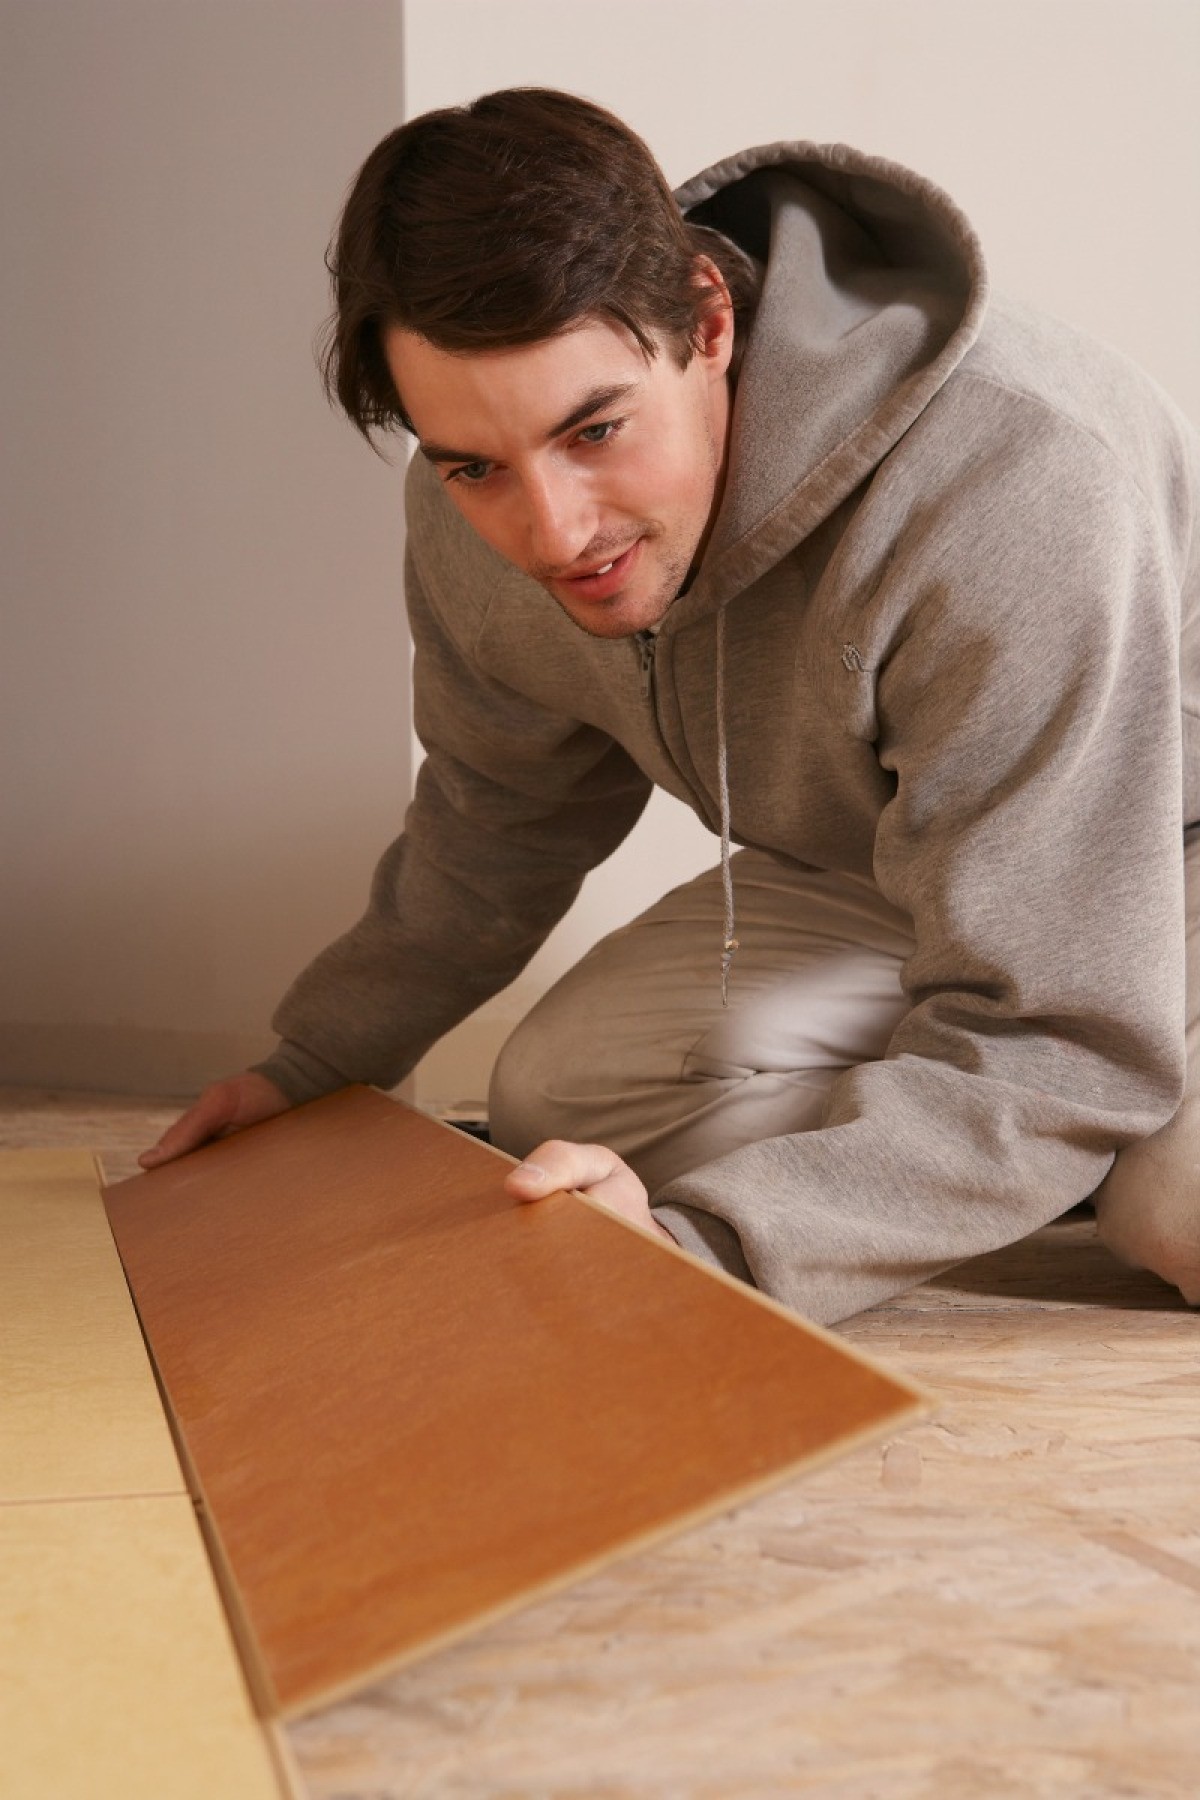 Installing Flooring On Particle Board, Can You Install Laminate Flooring Over Particle Board